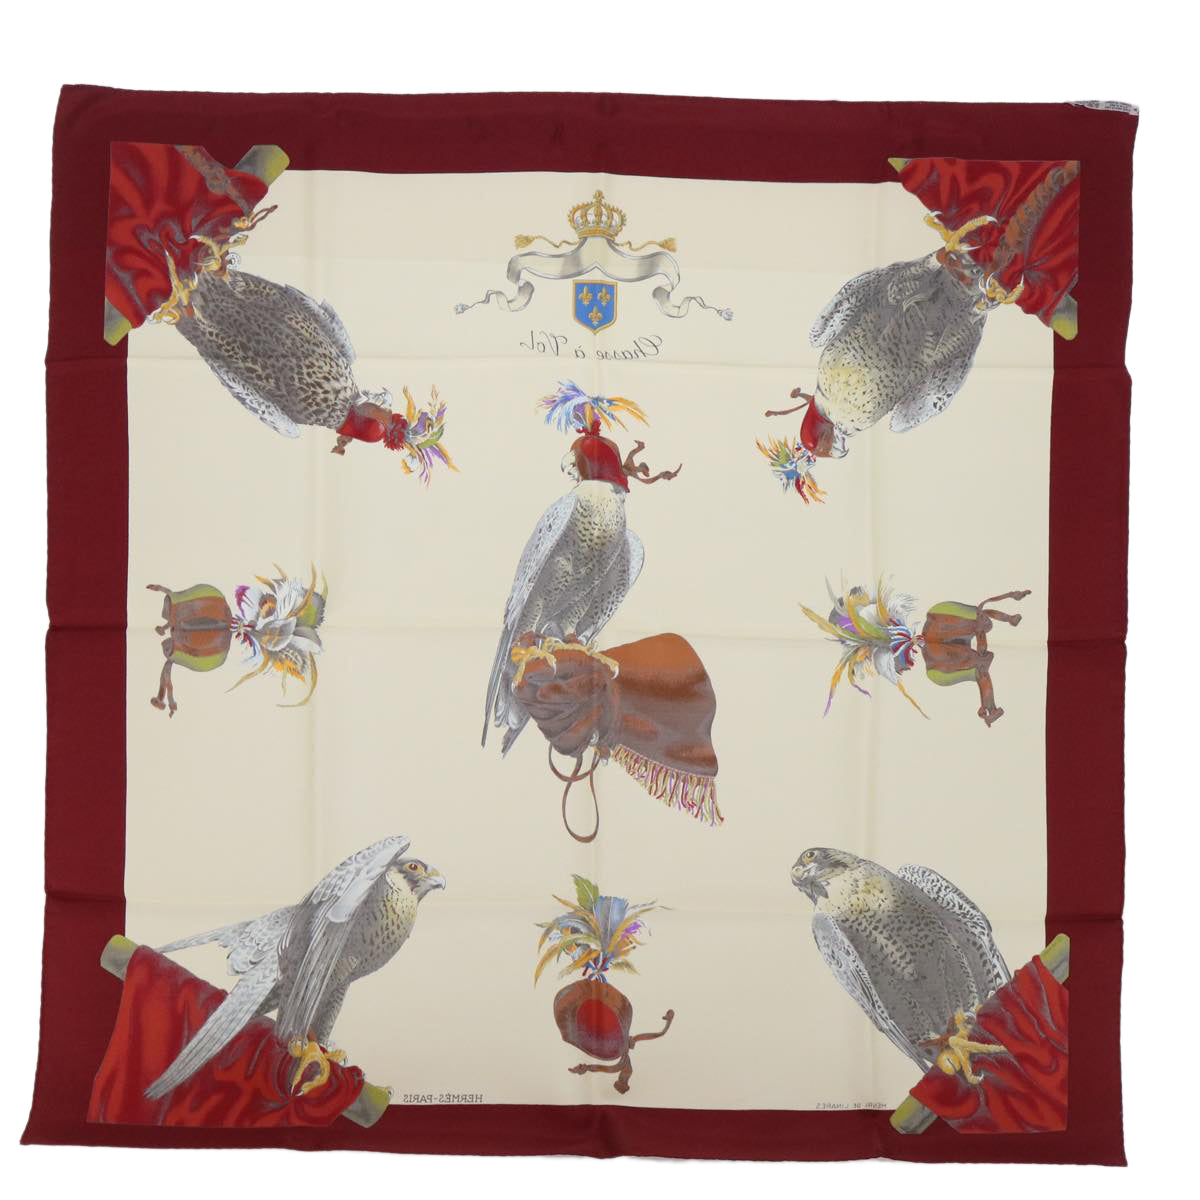 HERMES Carre 90 Chasse a VoL Scarf Silk Beige Wine Red Auth 51671